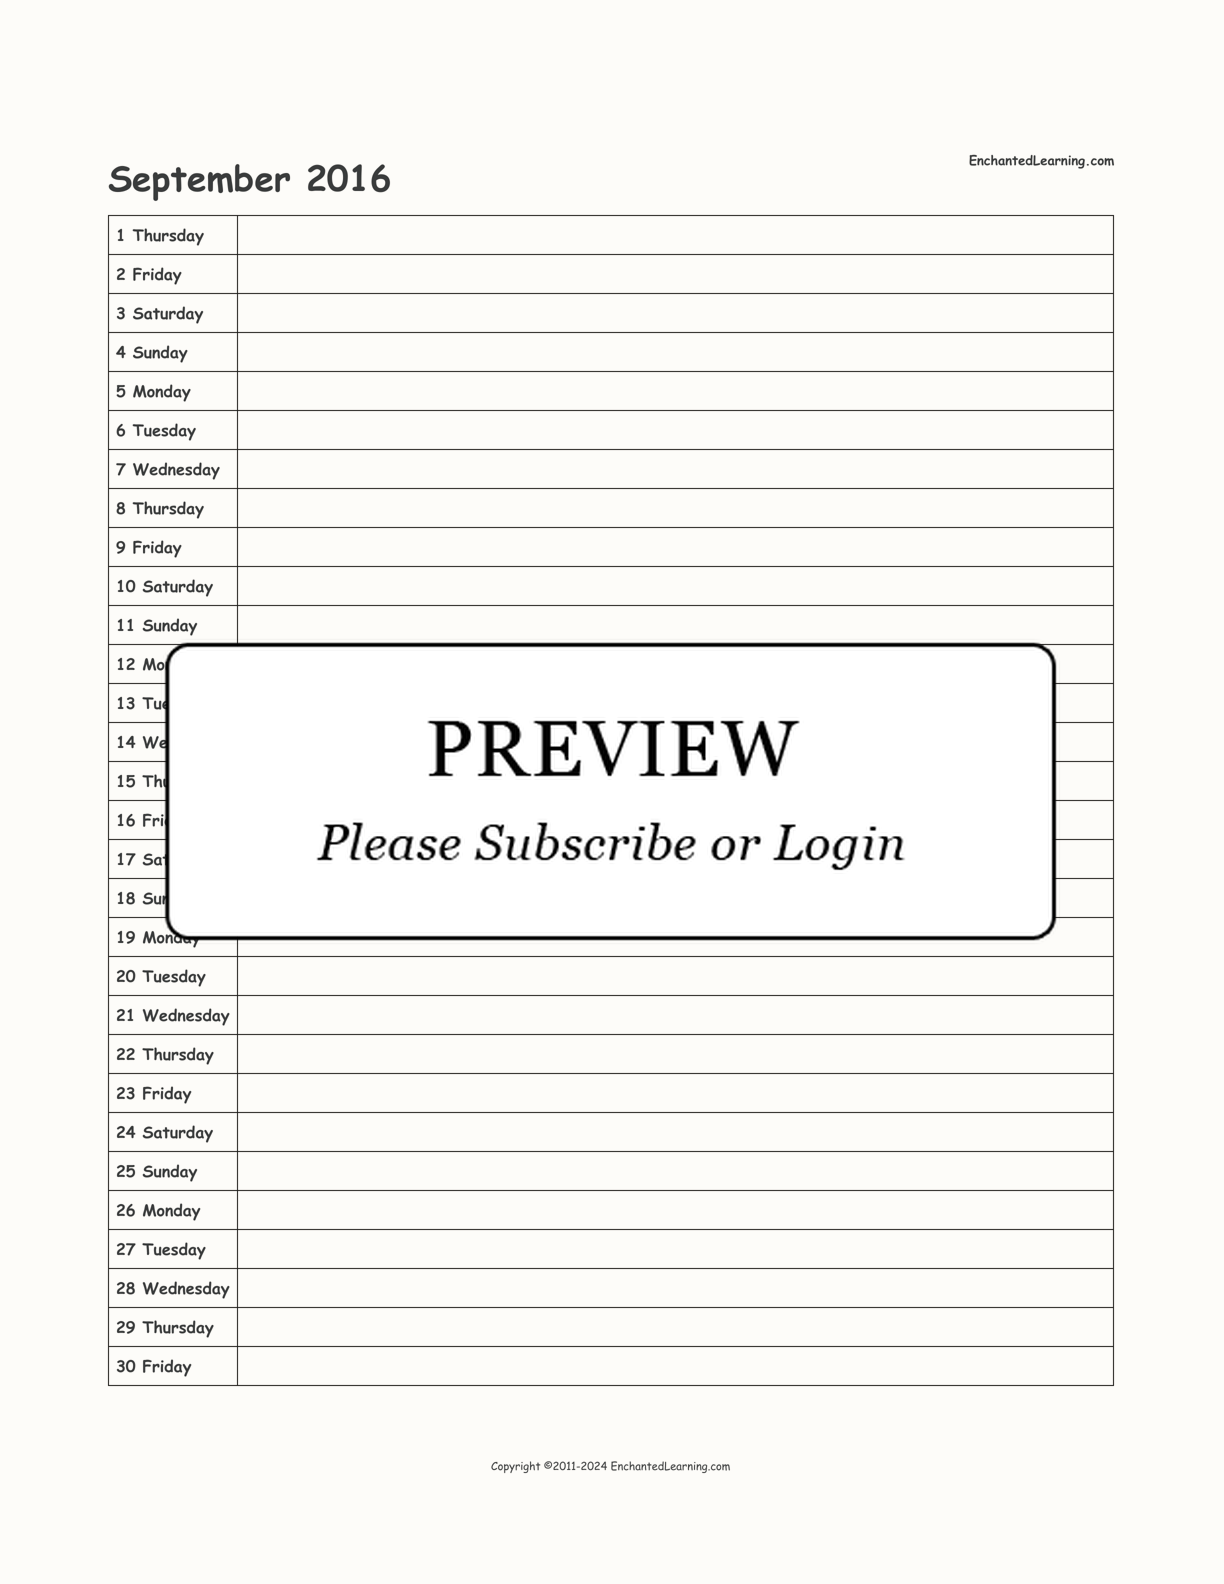 2016 Scheduling Calendar interactive printout page 9